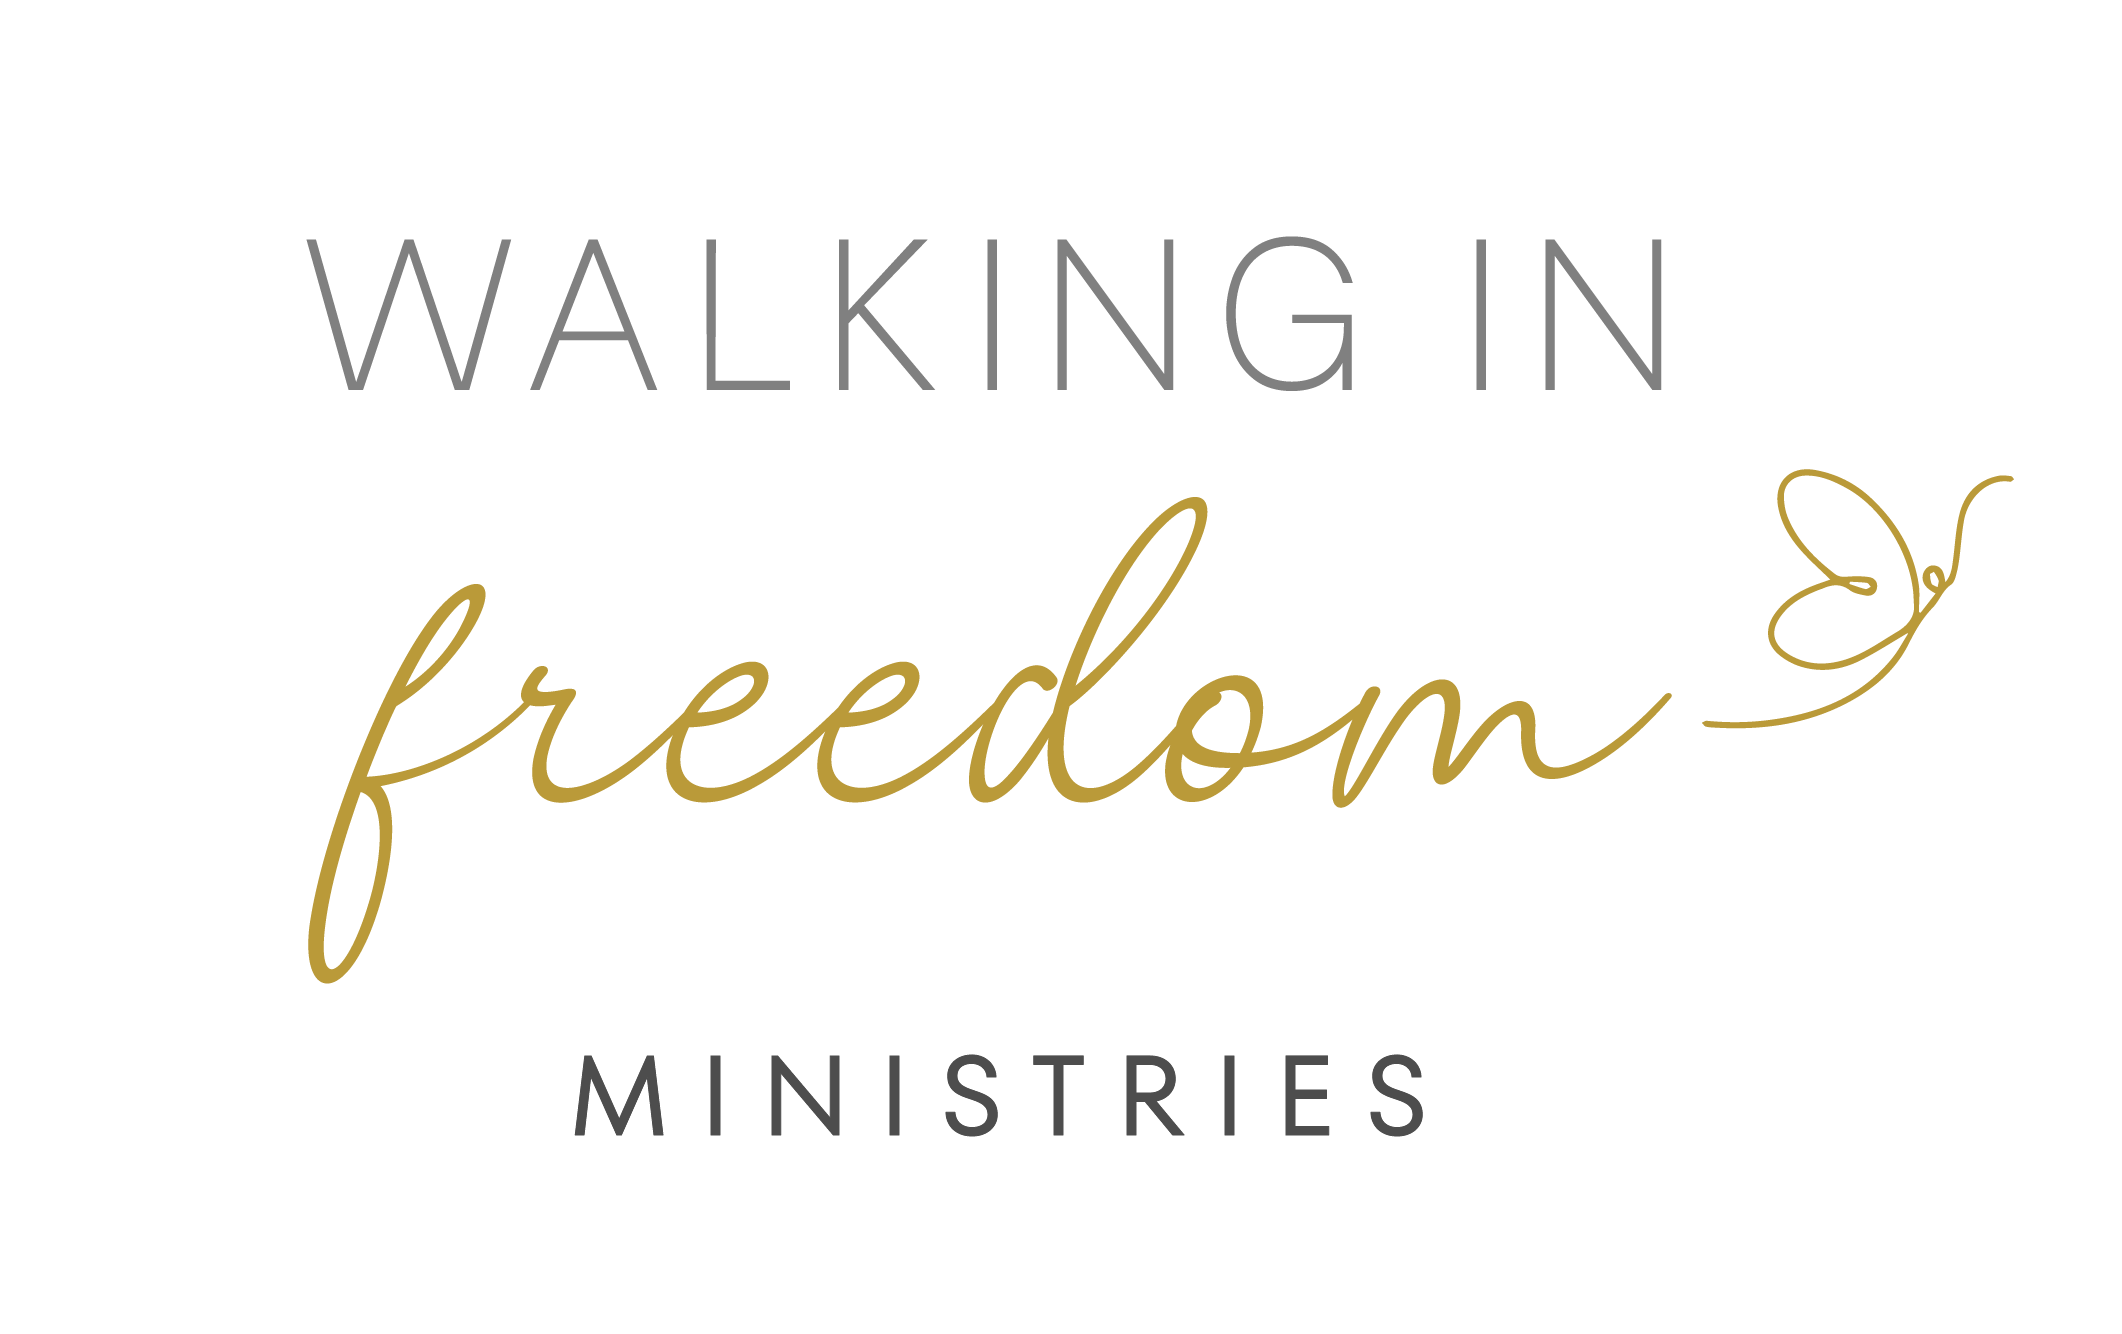 Walking in Freedom Ministries